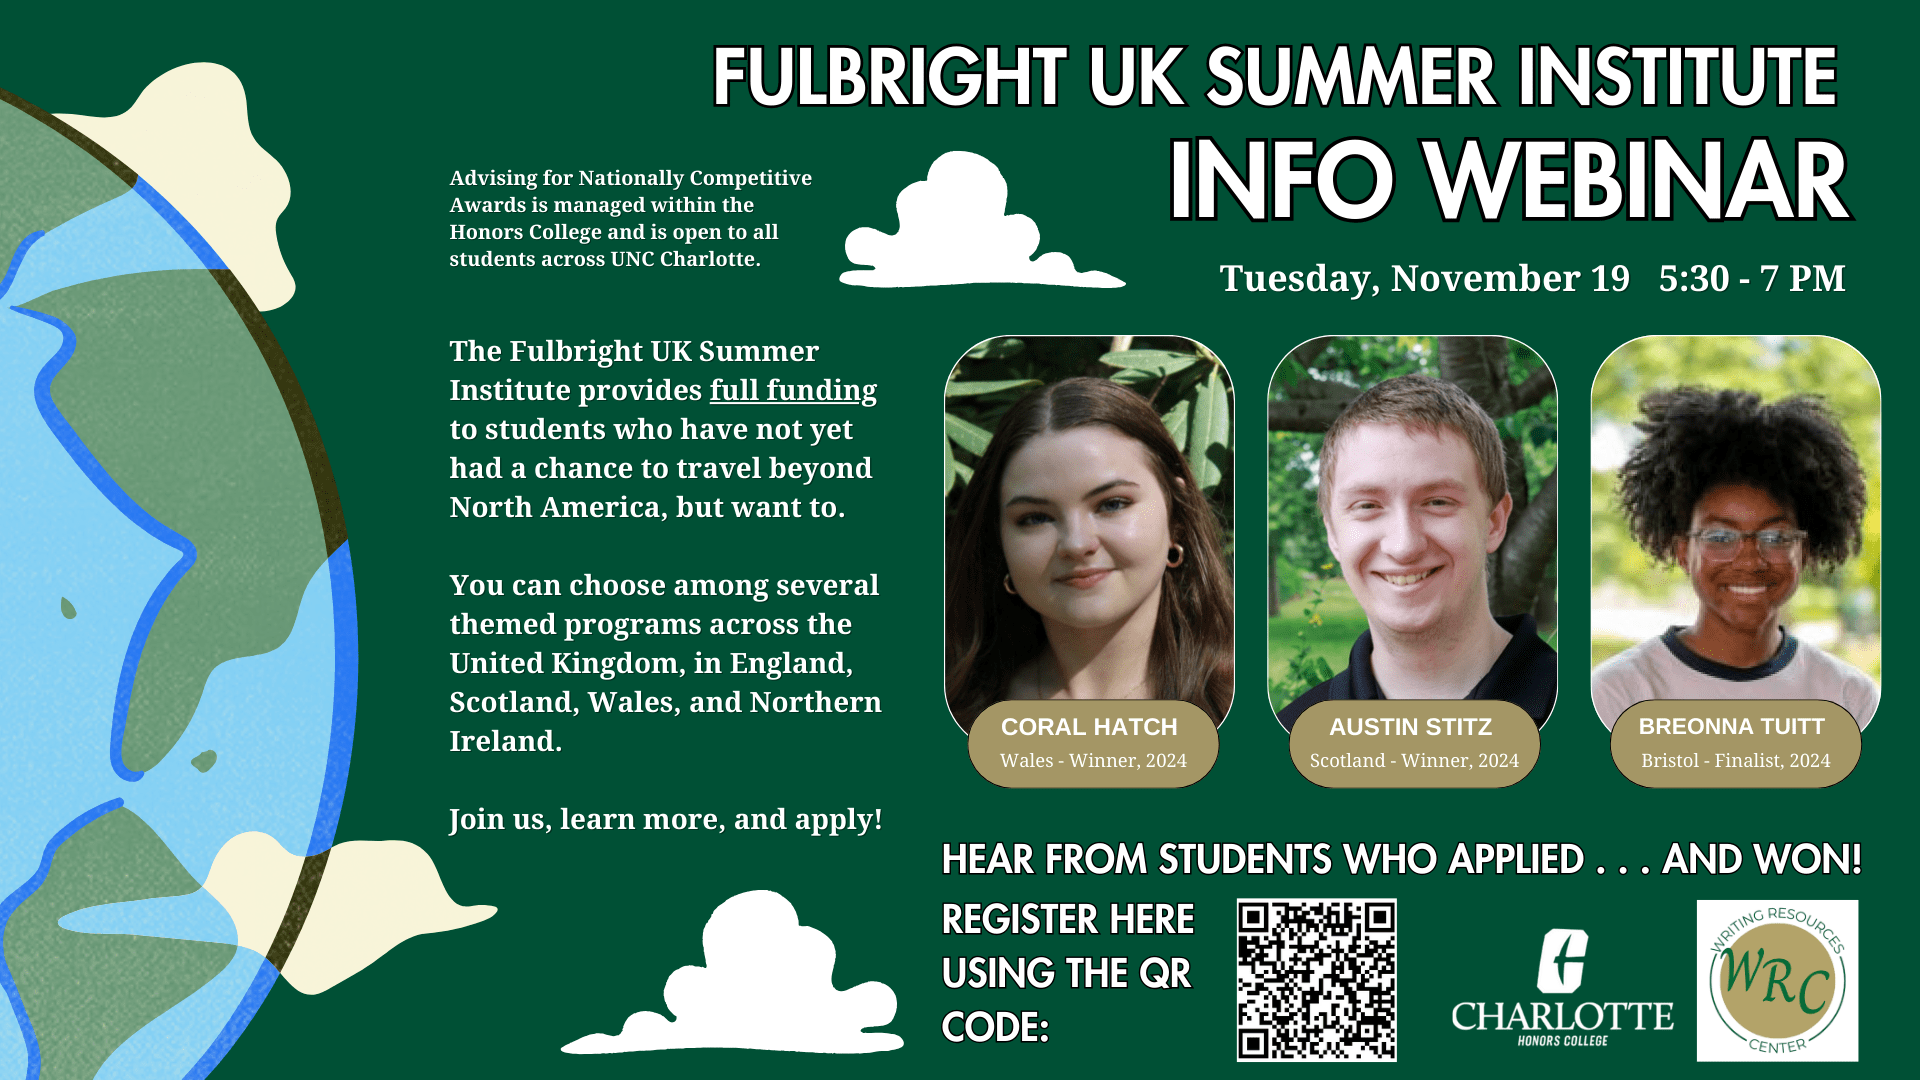 FulBright UK Summer Institute Info Webinar. Tuesday, November 19. 5:30-7pm.
Advising for Nationally Competitive Awards is managed within the Honors College and is open to all students across UNC Charlotte.

The Fulbright UK Summer Institute provides full funding to students who have not yet had a chance to travel beyond North America, but want to. You can choose among several themed programs across the United Kingdom, in England, Scotland, Wales, and Northern Ireland. Join us, learn more, and apply!

Coral Hatch: Wales - Winner, 2024
Austin Stitz: Scotland - Winner, 2024
Breonna Tuitt: Bristol - Finalist, 2024

Hear from students who applied...and won! Register here using the QR code: